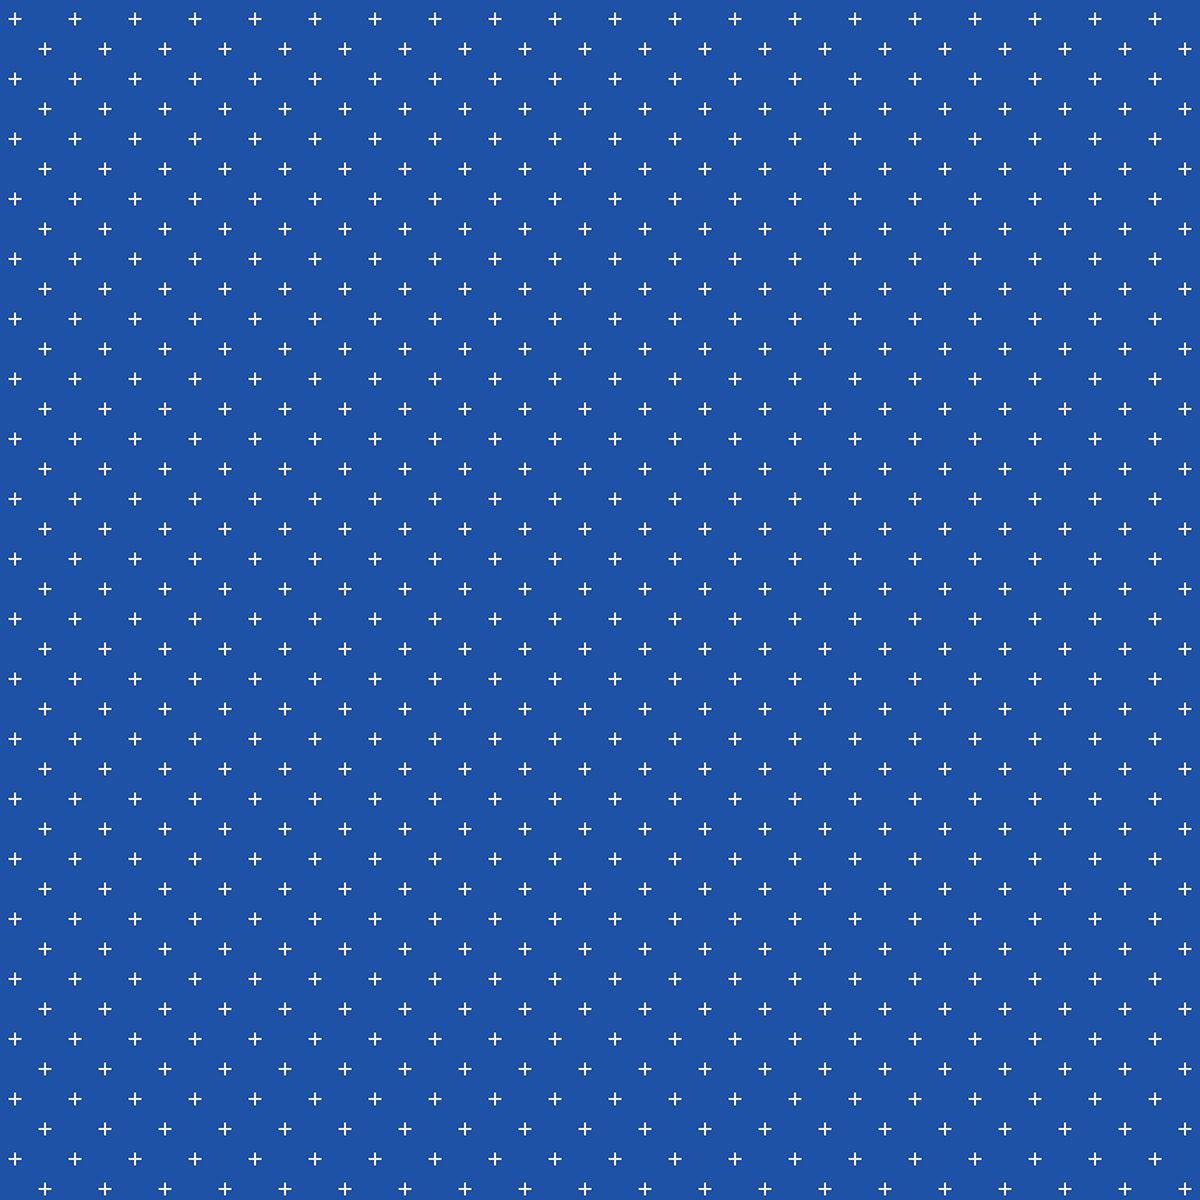 Ruby Star Society-Add It Up-fabric-Blue Ribbon 60-gather here online